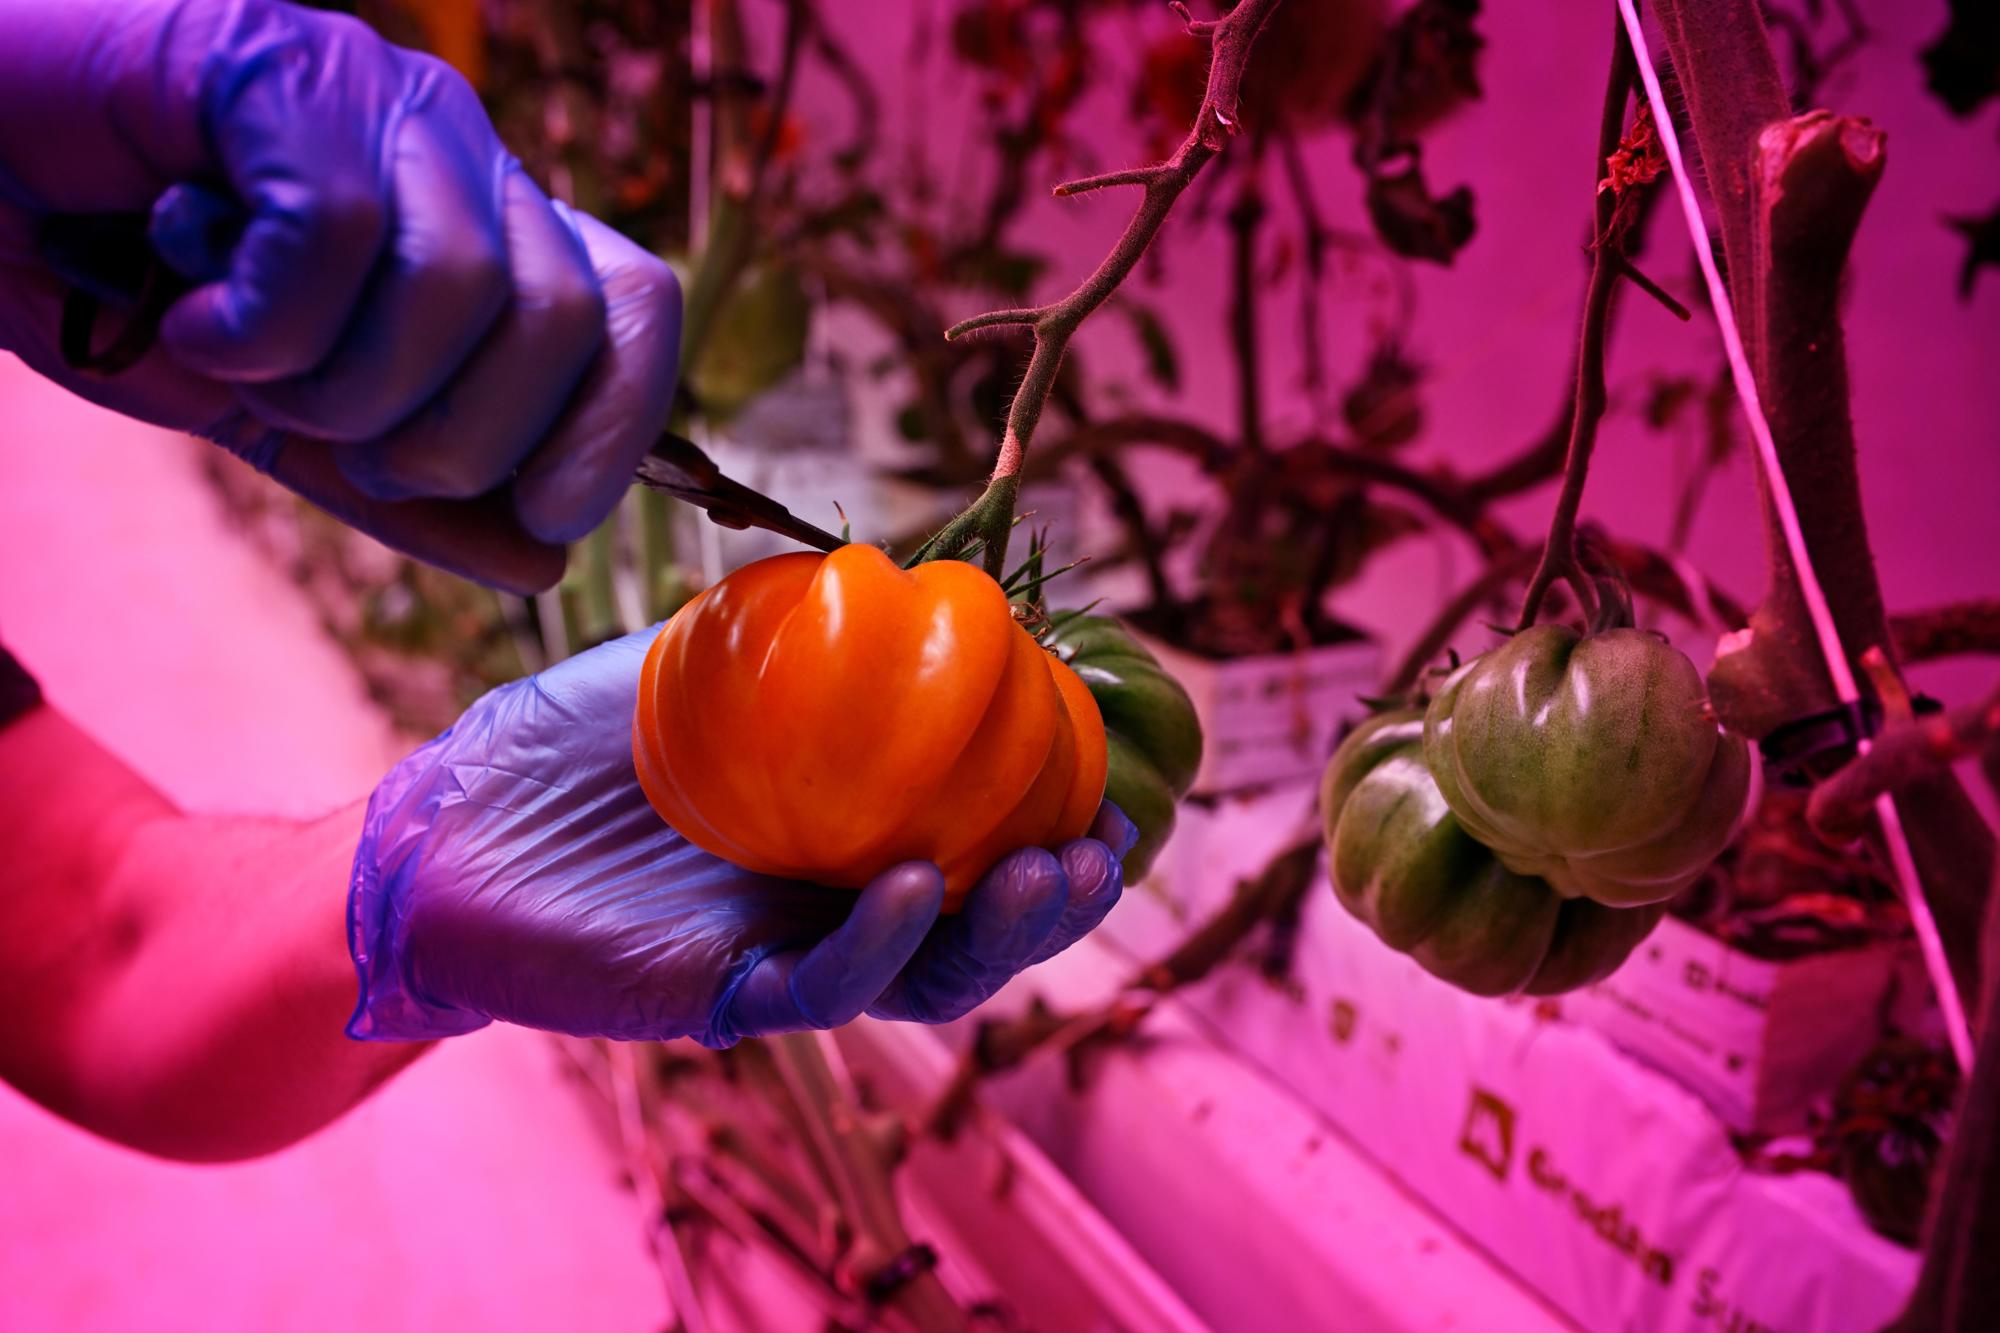 GrowWise in Eindhoven uses vertical farming to grow tomatoes